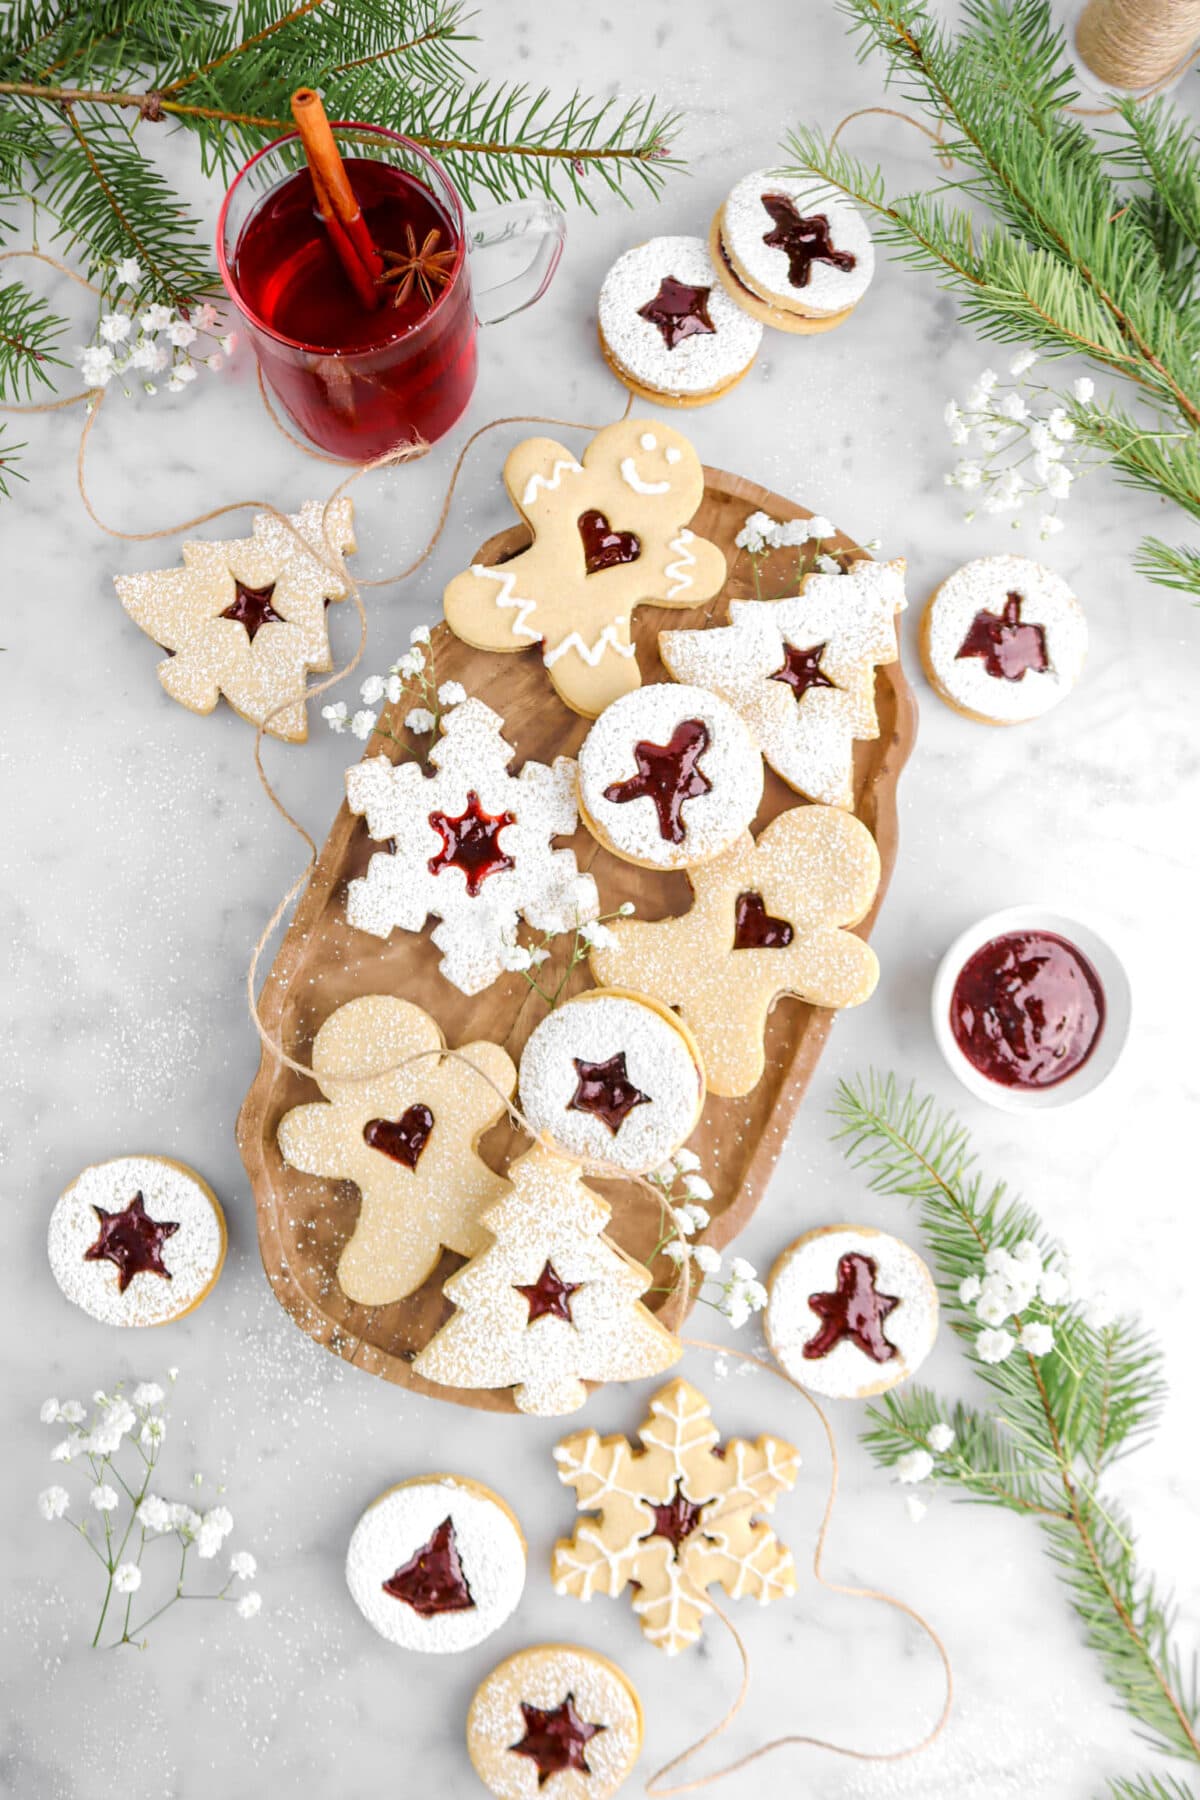 linzer cookies on wood tray with more cookies around, white flowers, pine branches, and glass of mulled wine on marble surface.